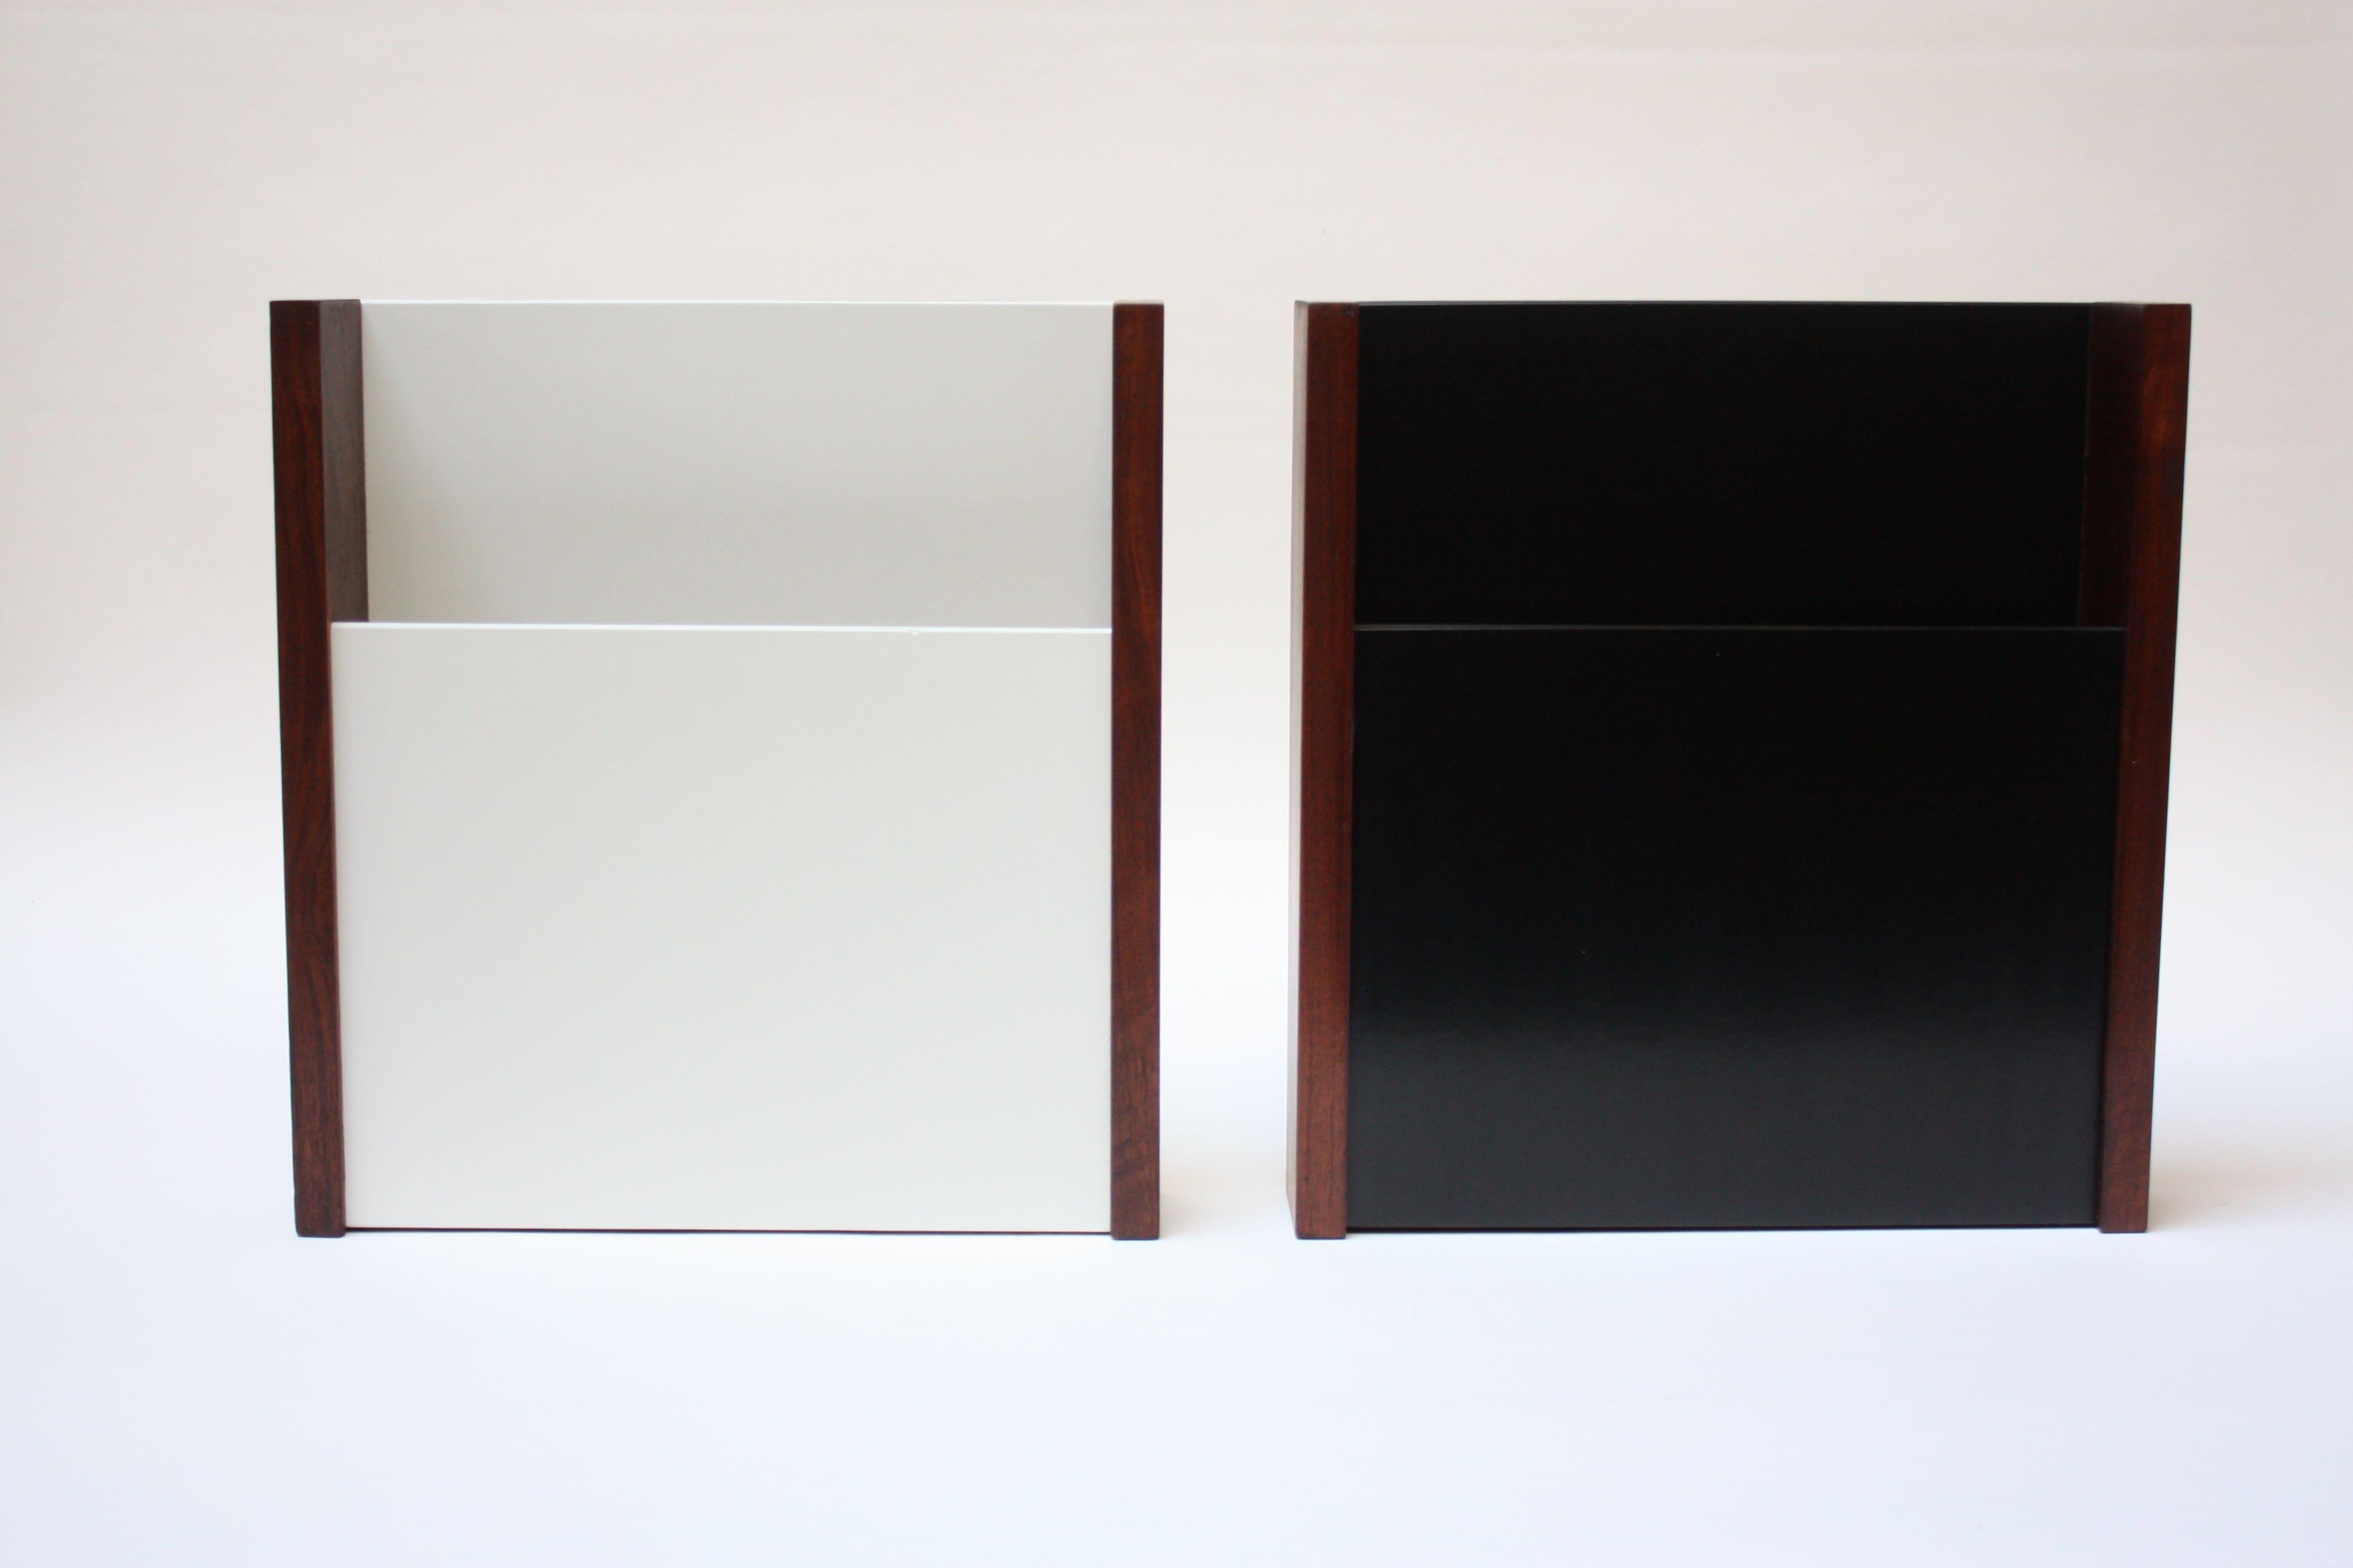 Pair Of Peter Pepper Black And White Wall Mounted Magazine Holders